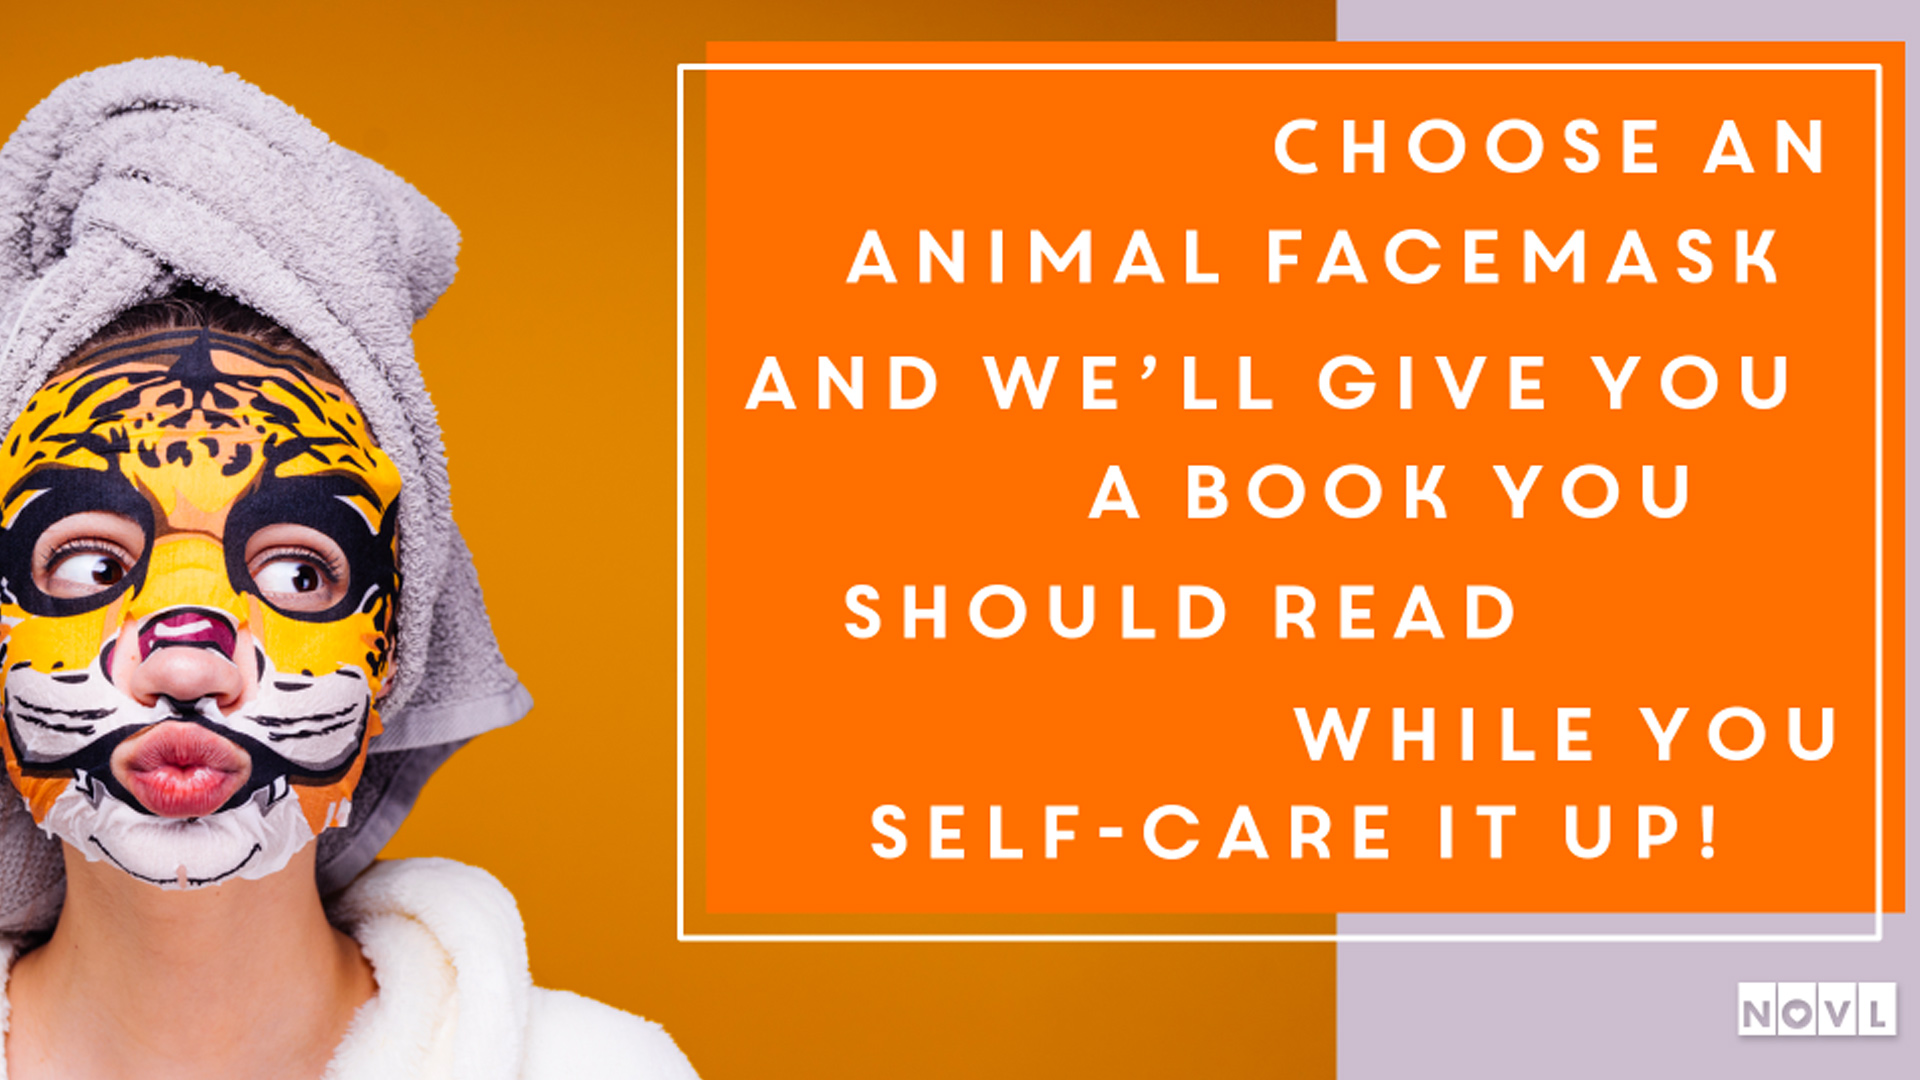 The NOVL Blog, Featured Image for Article: Choose an animal facemask, and we'll give you a book you should read while you self-care it up!